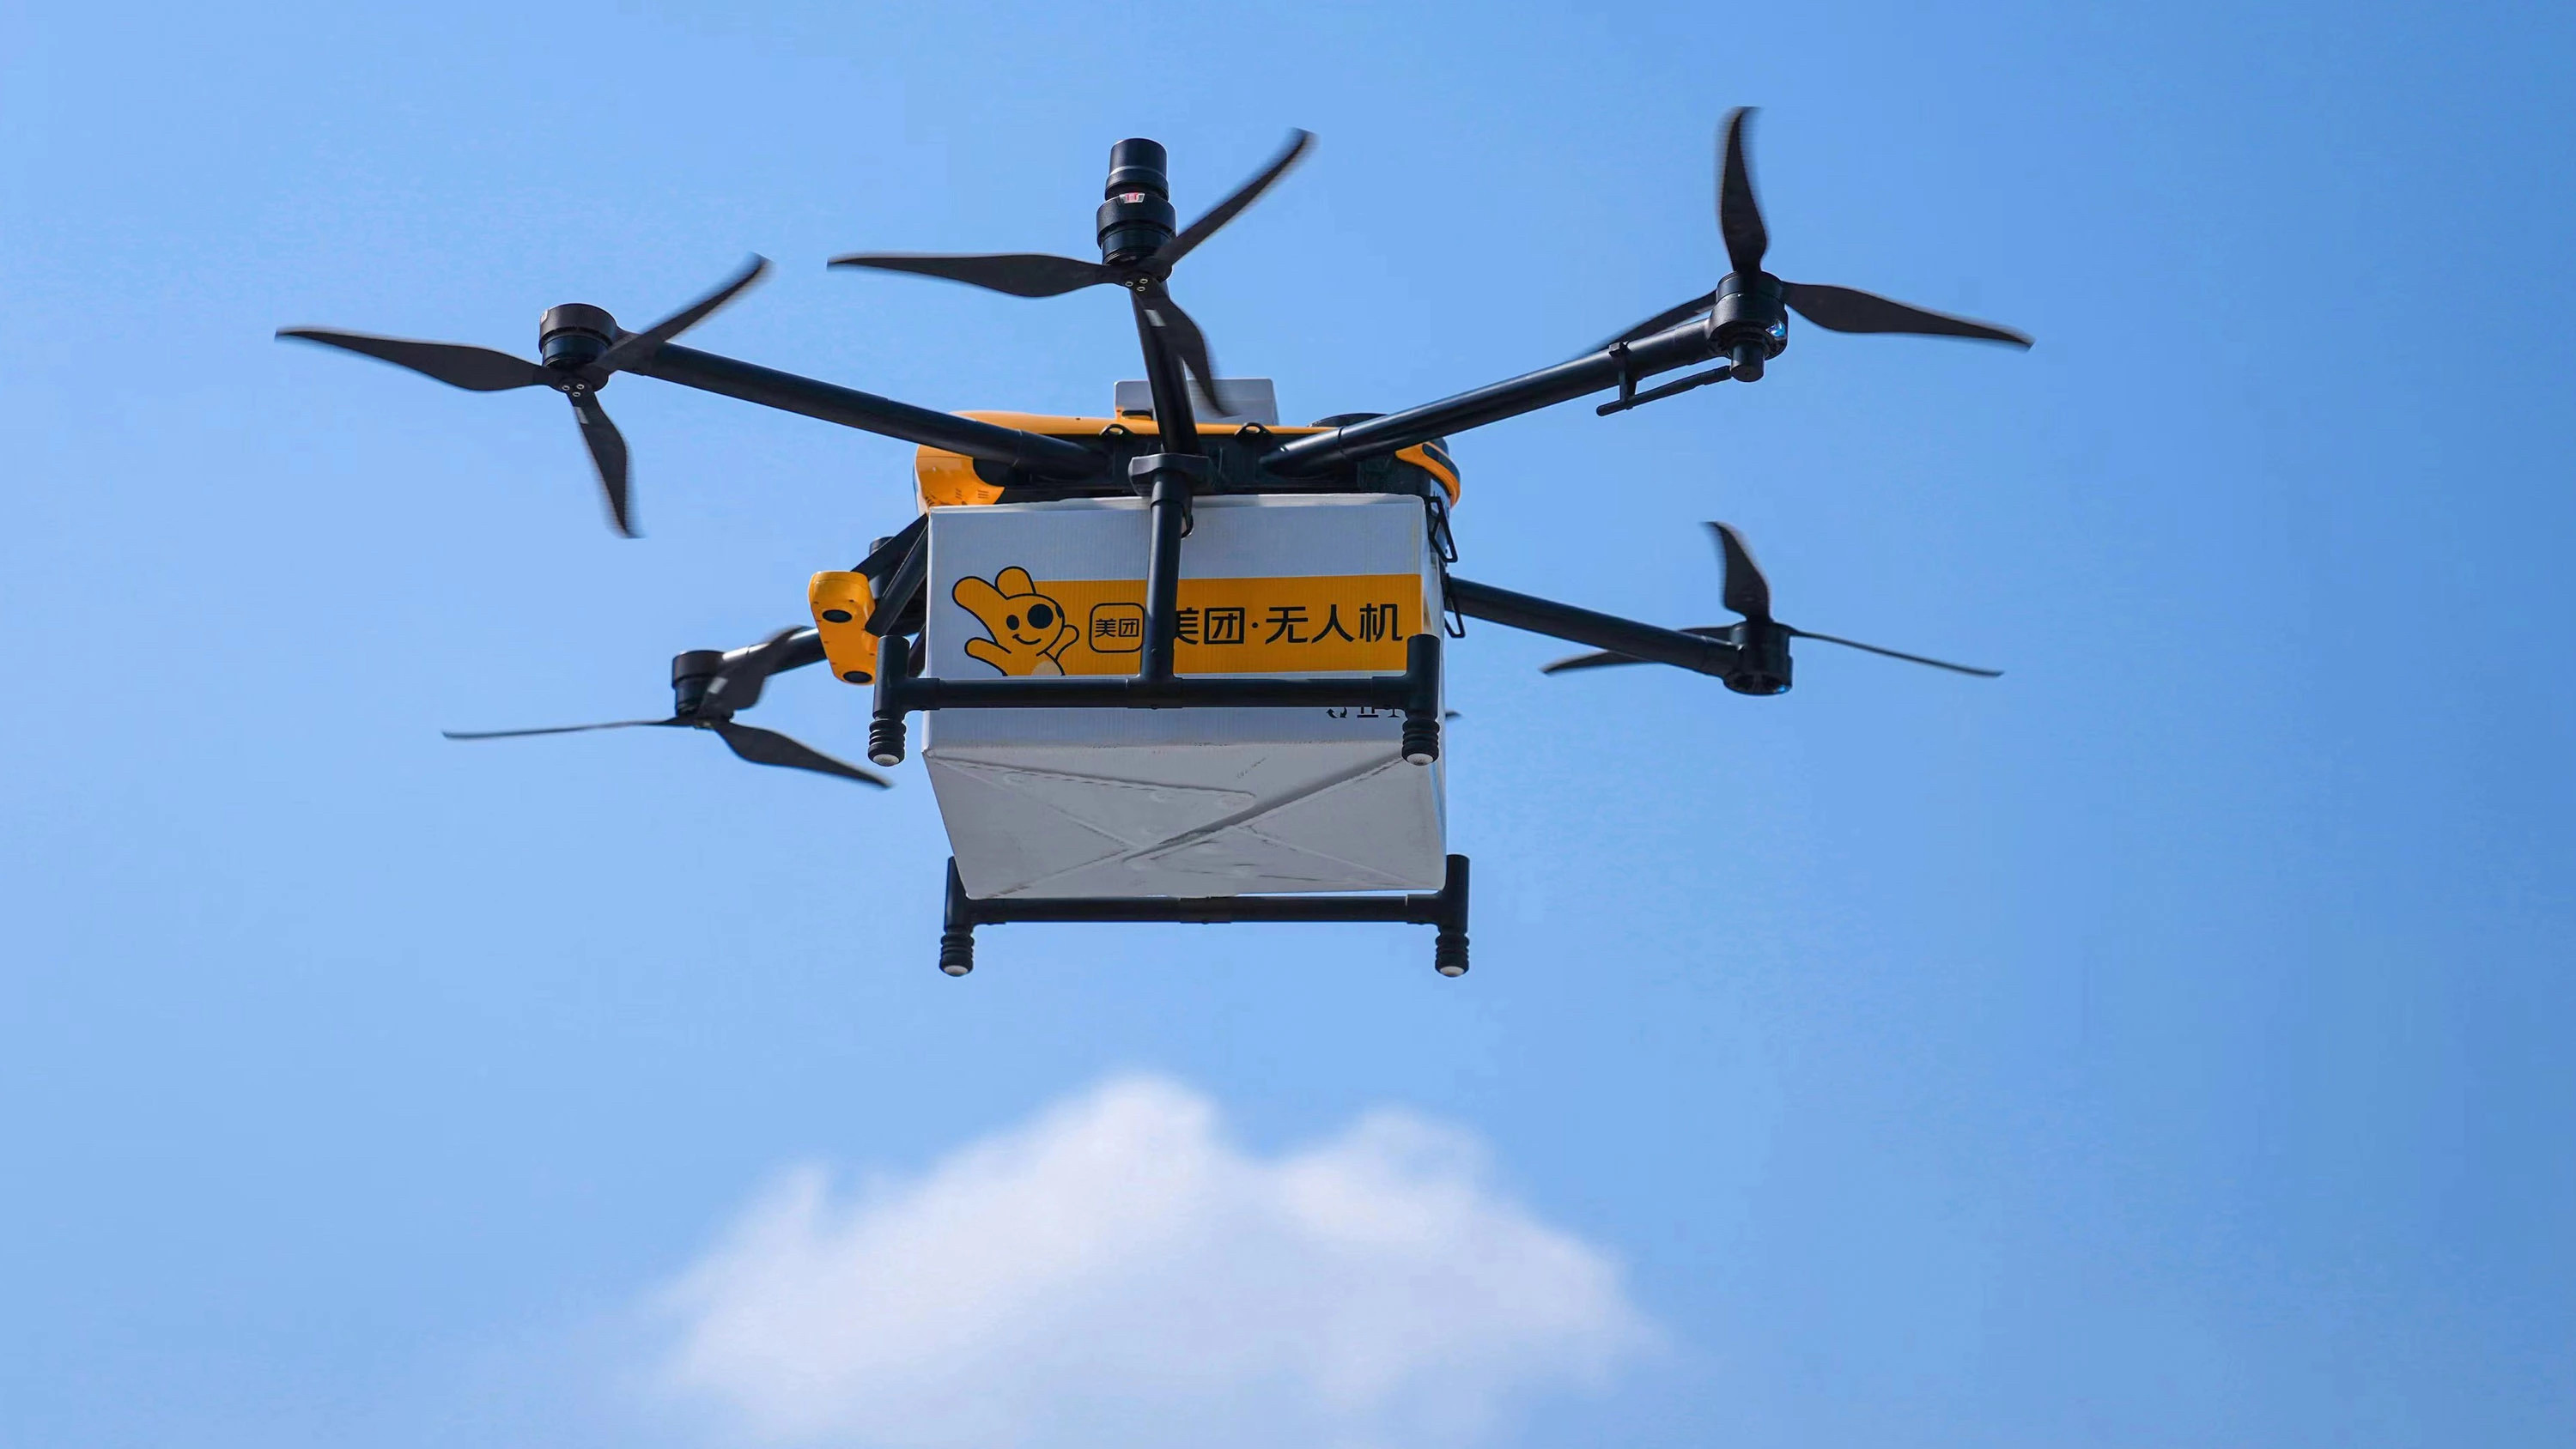 Food delivery platform Meituan is using China’s tech hub Shenzhen as a testing ground for drone deliveries, and with residents getting used to the technology, it could soon take off in a big way. Photo: Meituan